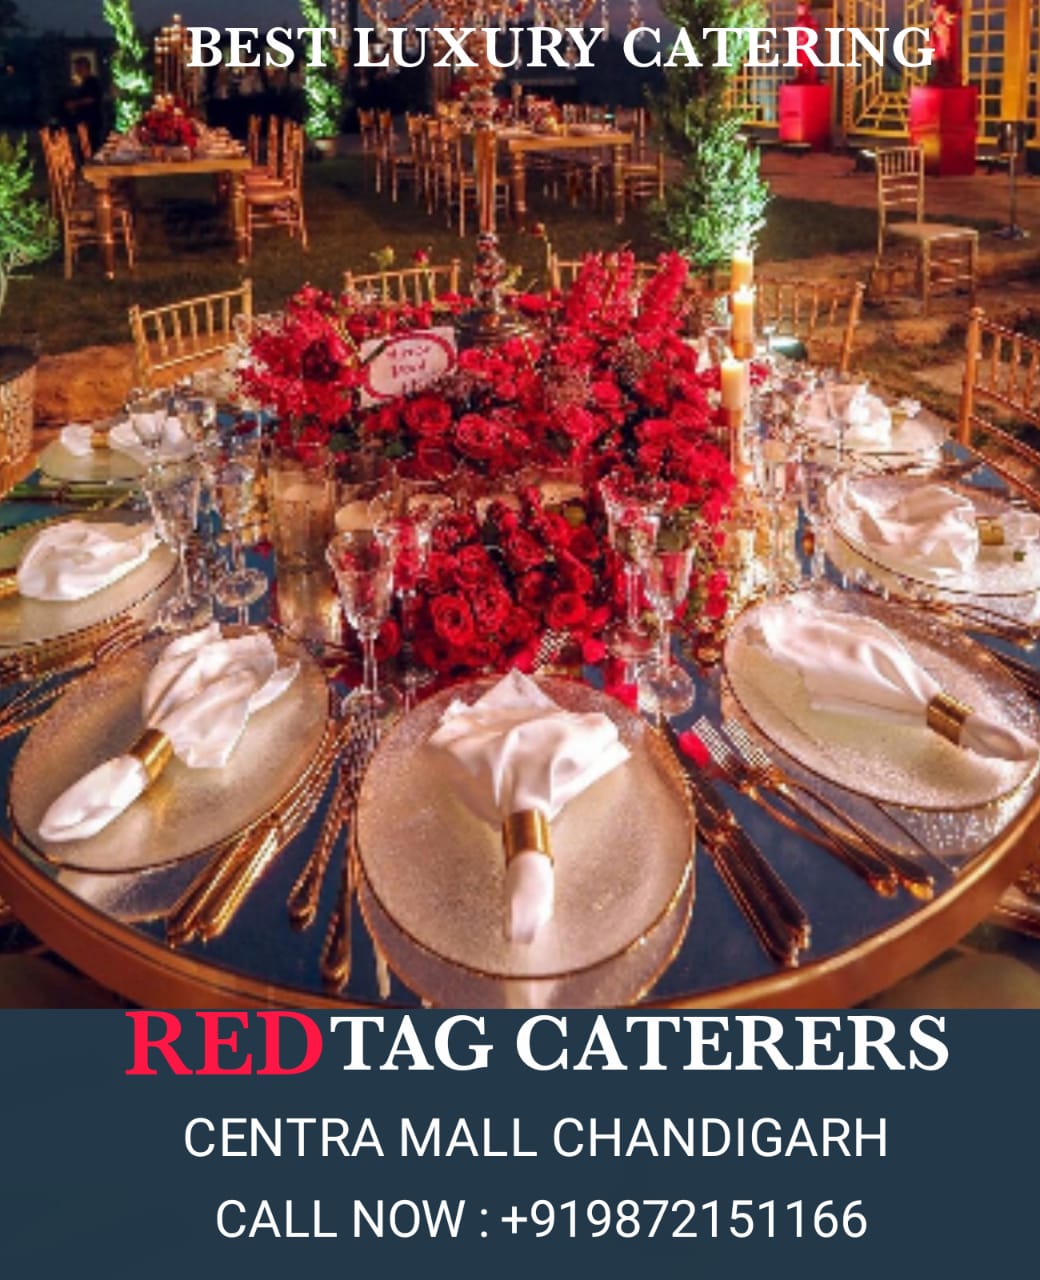 high-quality catering service in Mohali punjab. | Red Tag Caterers | High quality catering service in Mohali punjab, best quality catering service in Mohali punjab, top quality catering service in Mohali punjab, best food catering service in Mohali punjab,  - GL46763